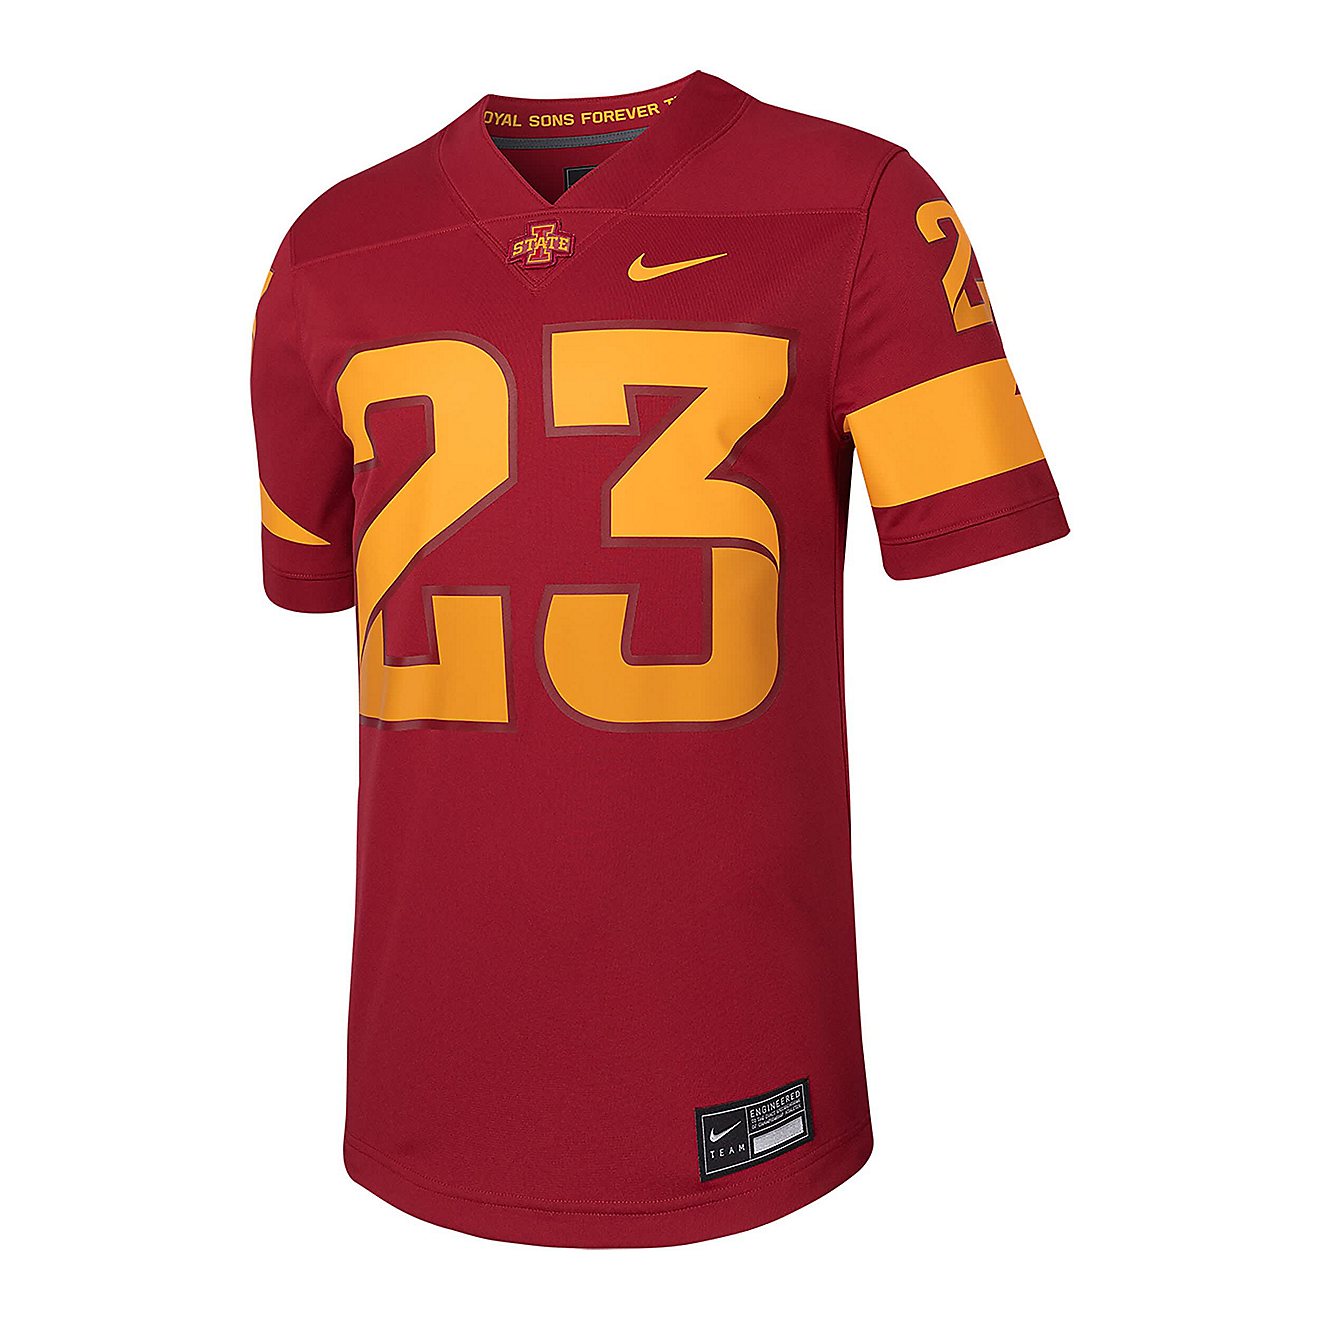 Nike 23 Iowa State Cyclones Untouchable Football Replica Jersey                                                                  - view number 2